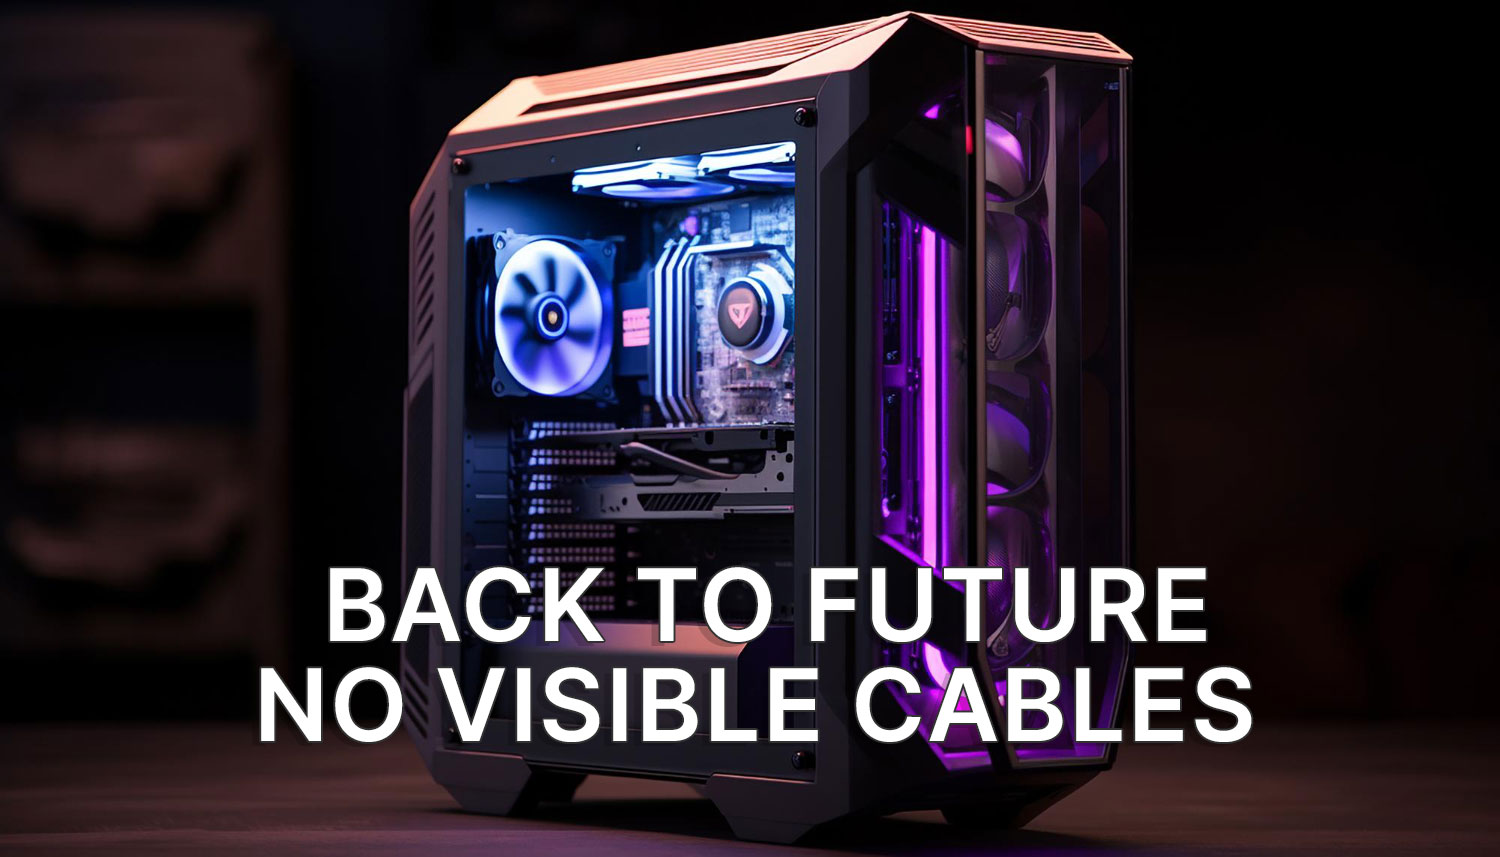 asus back to future no visible cables alliance